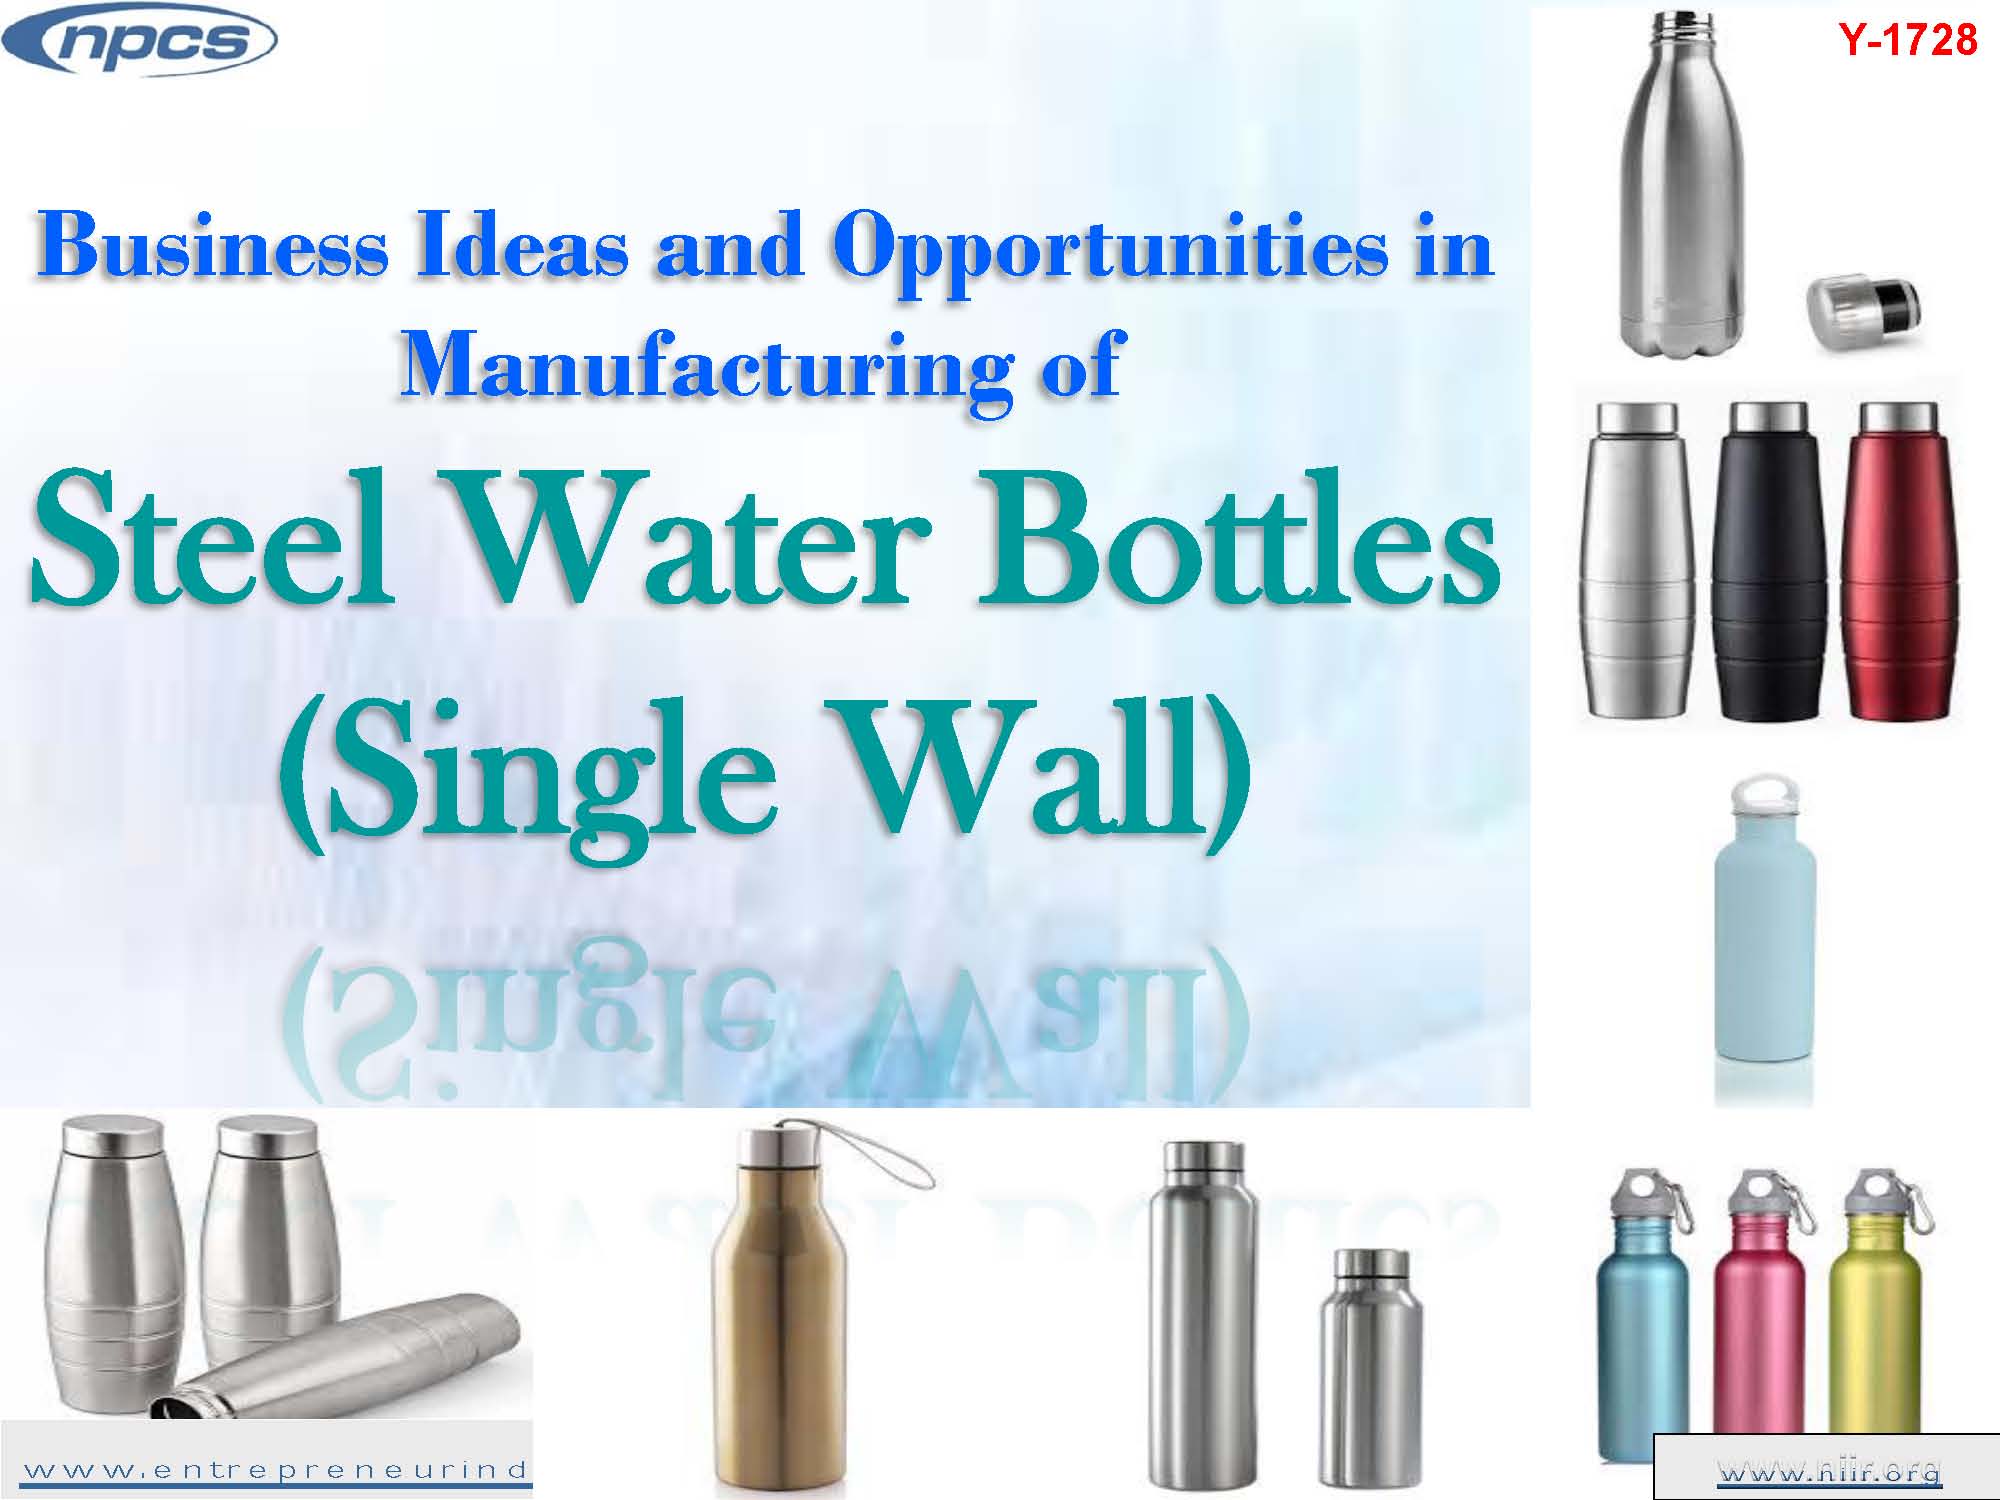 Business Ideas and Opportunities in Manufacturing of Steel Water Bottles (Single Wall)